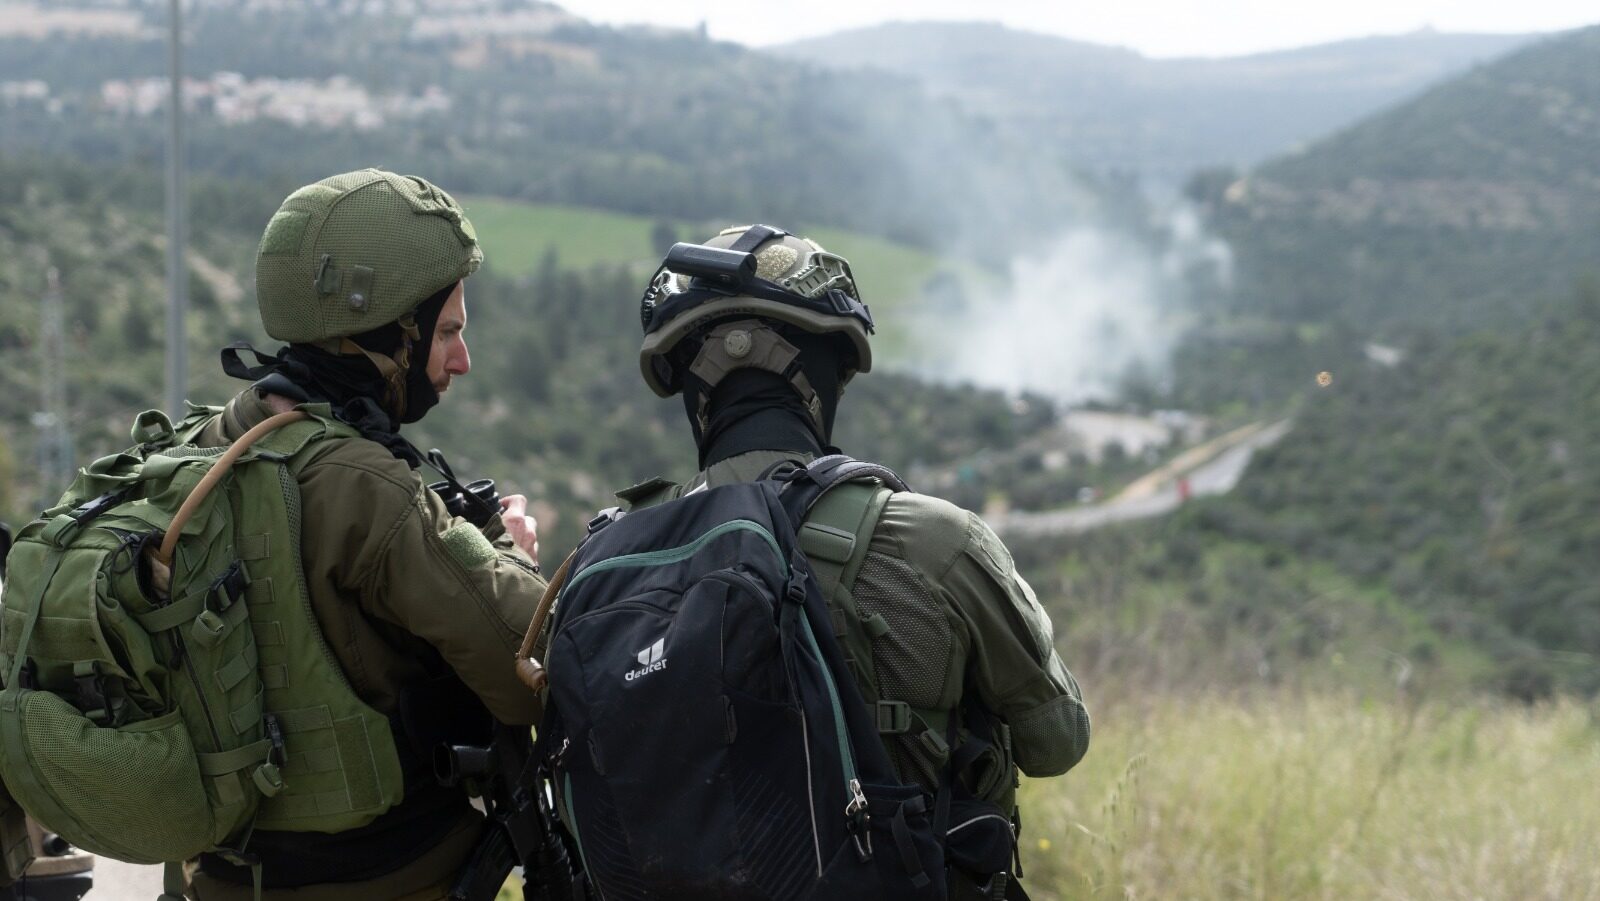 Palestinian Sniper Wounds Seven Israelis During Hours-Long Clashes In West Bank (Videos)